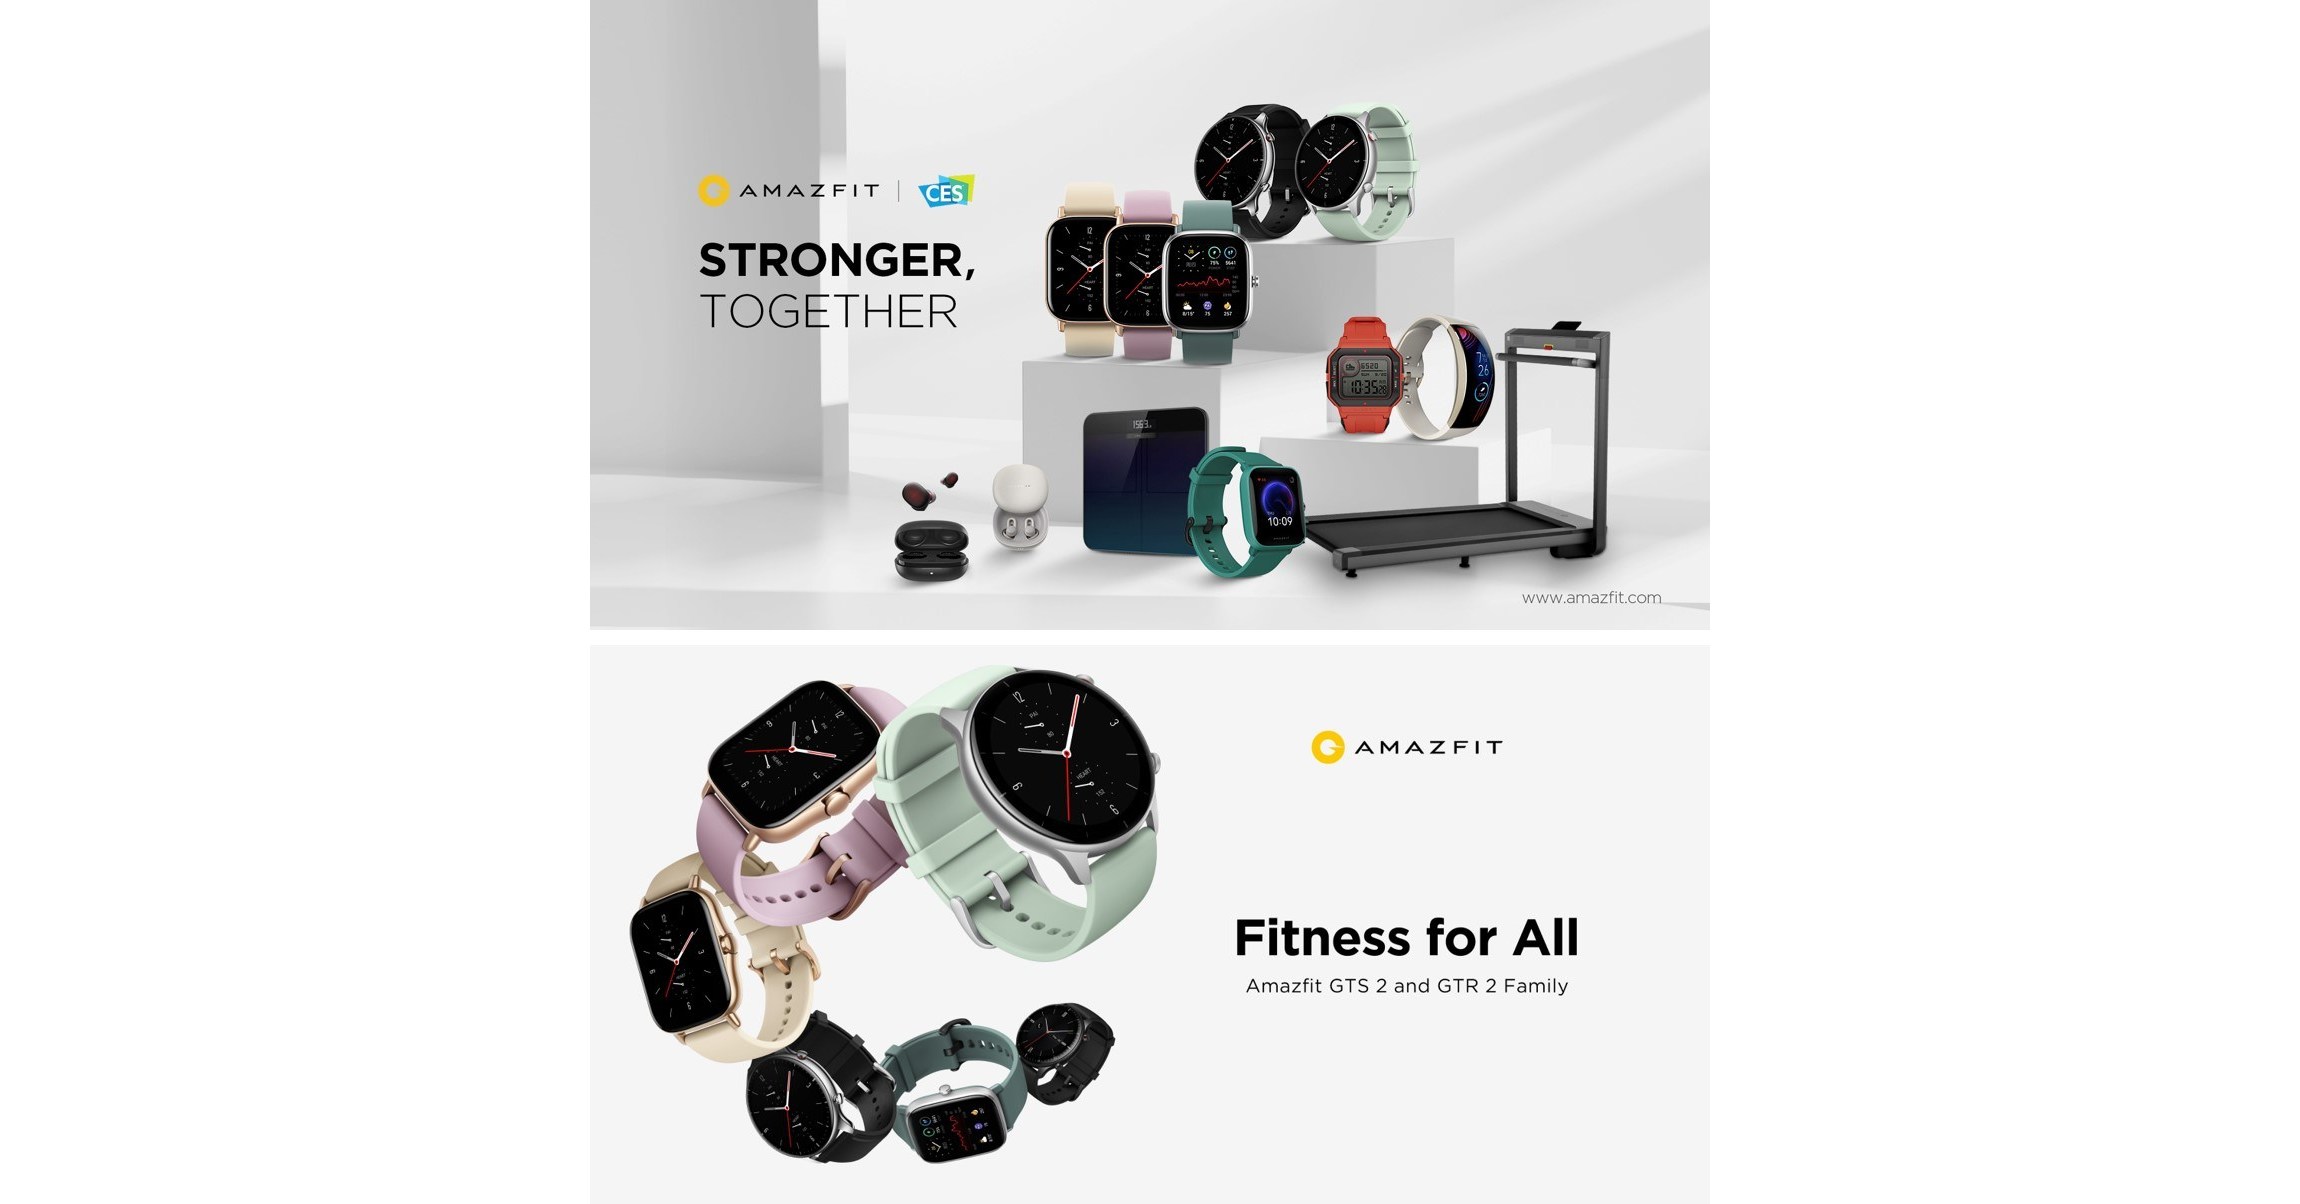 Amazfit is showcasing its vision for Fitness Tech and Wearables at CES 2021